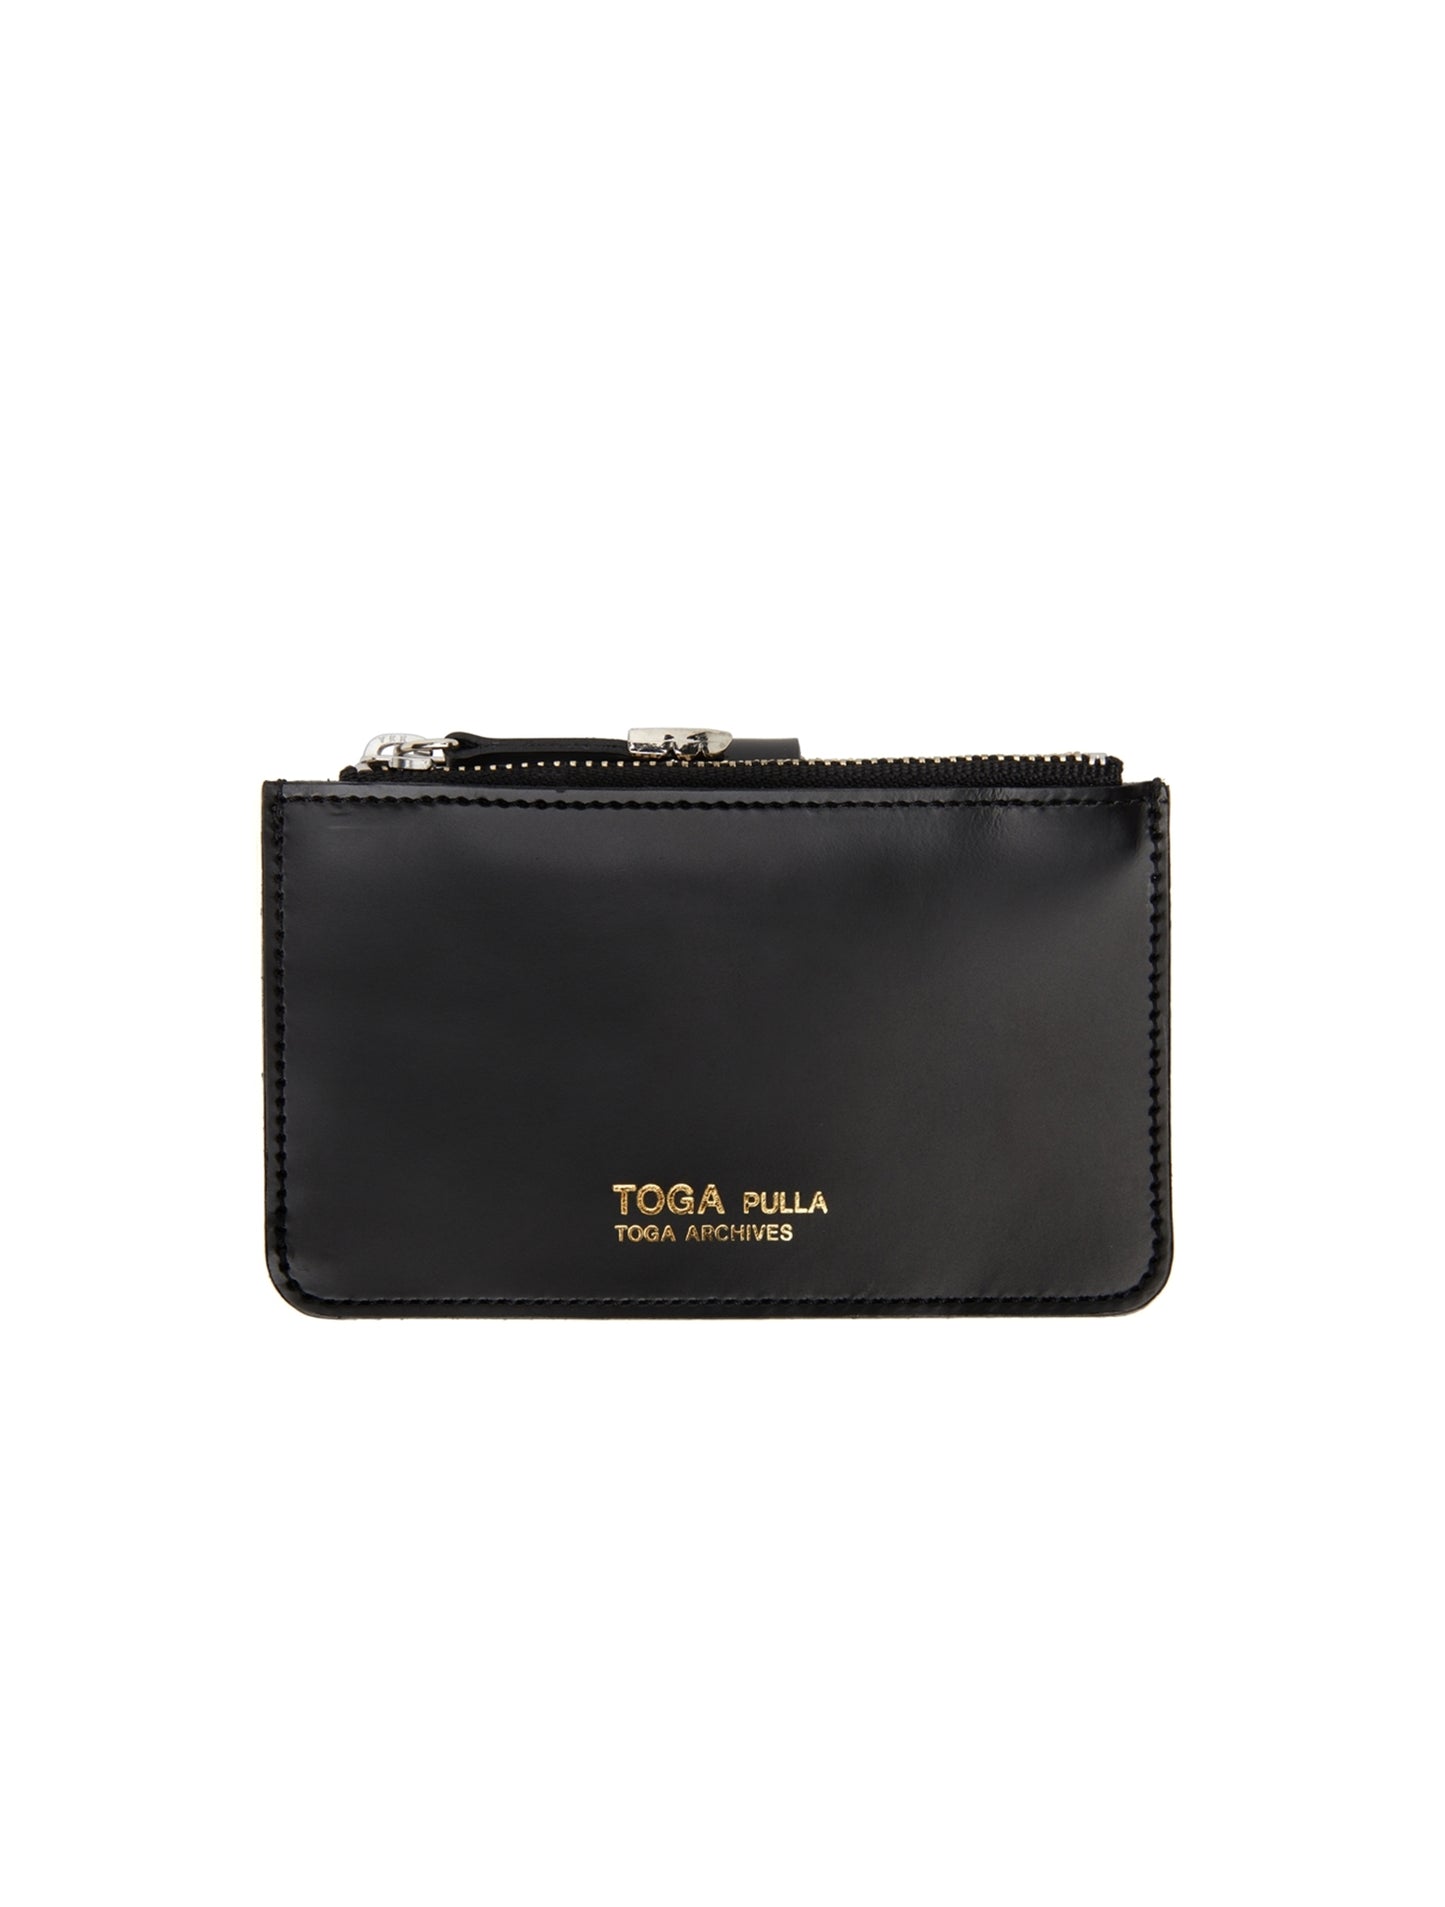 Toga Pulla Small Leather Wallet